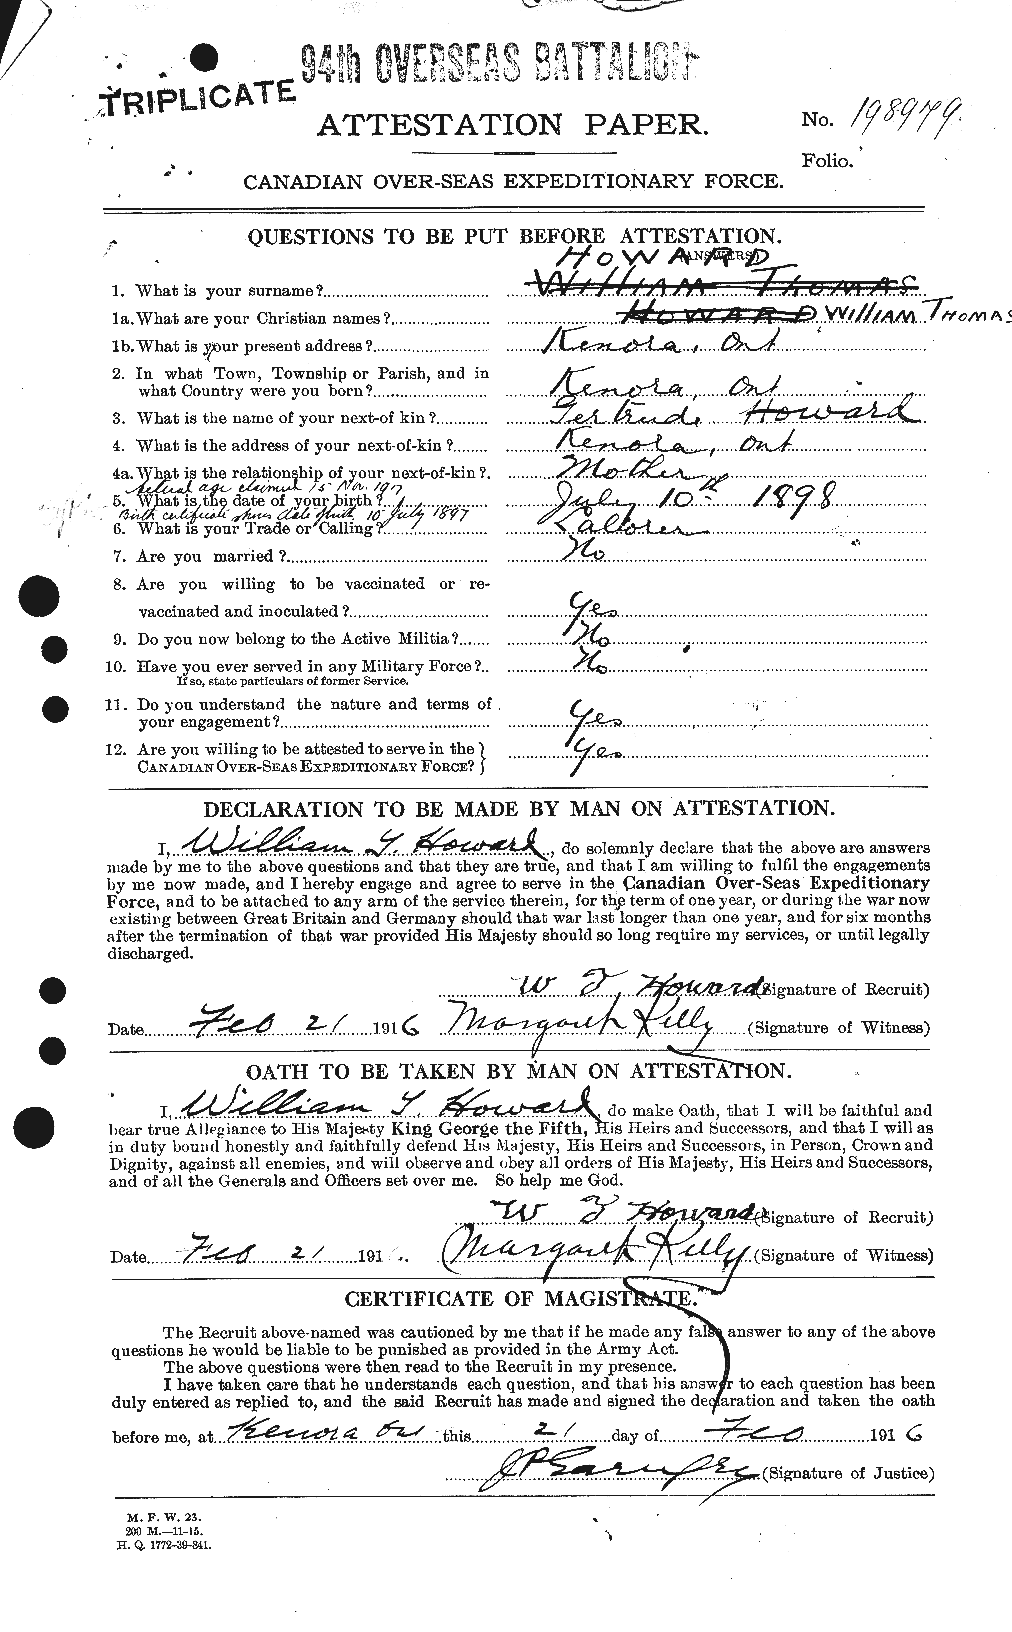 Personnel Records of the First World War - CEF 405101a